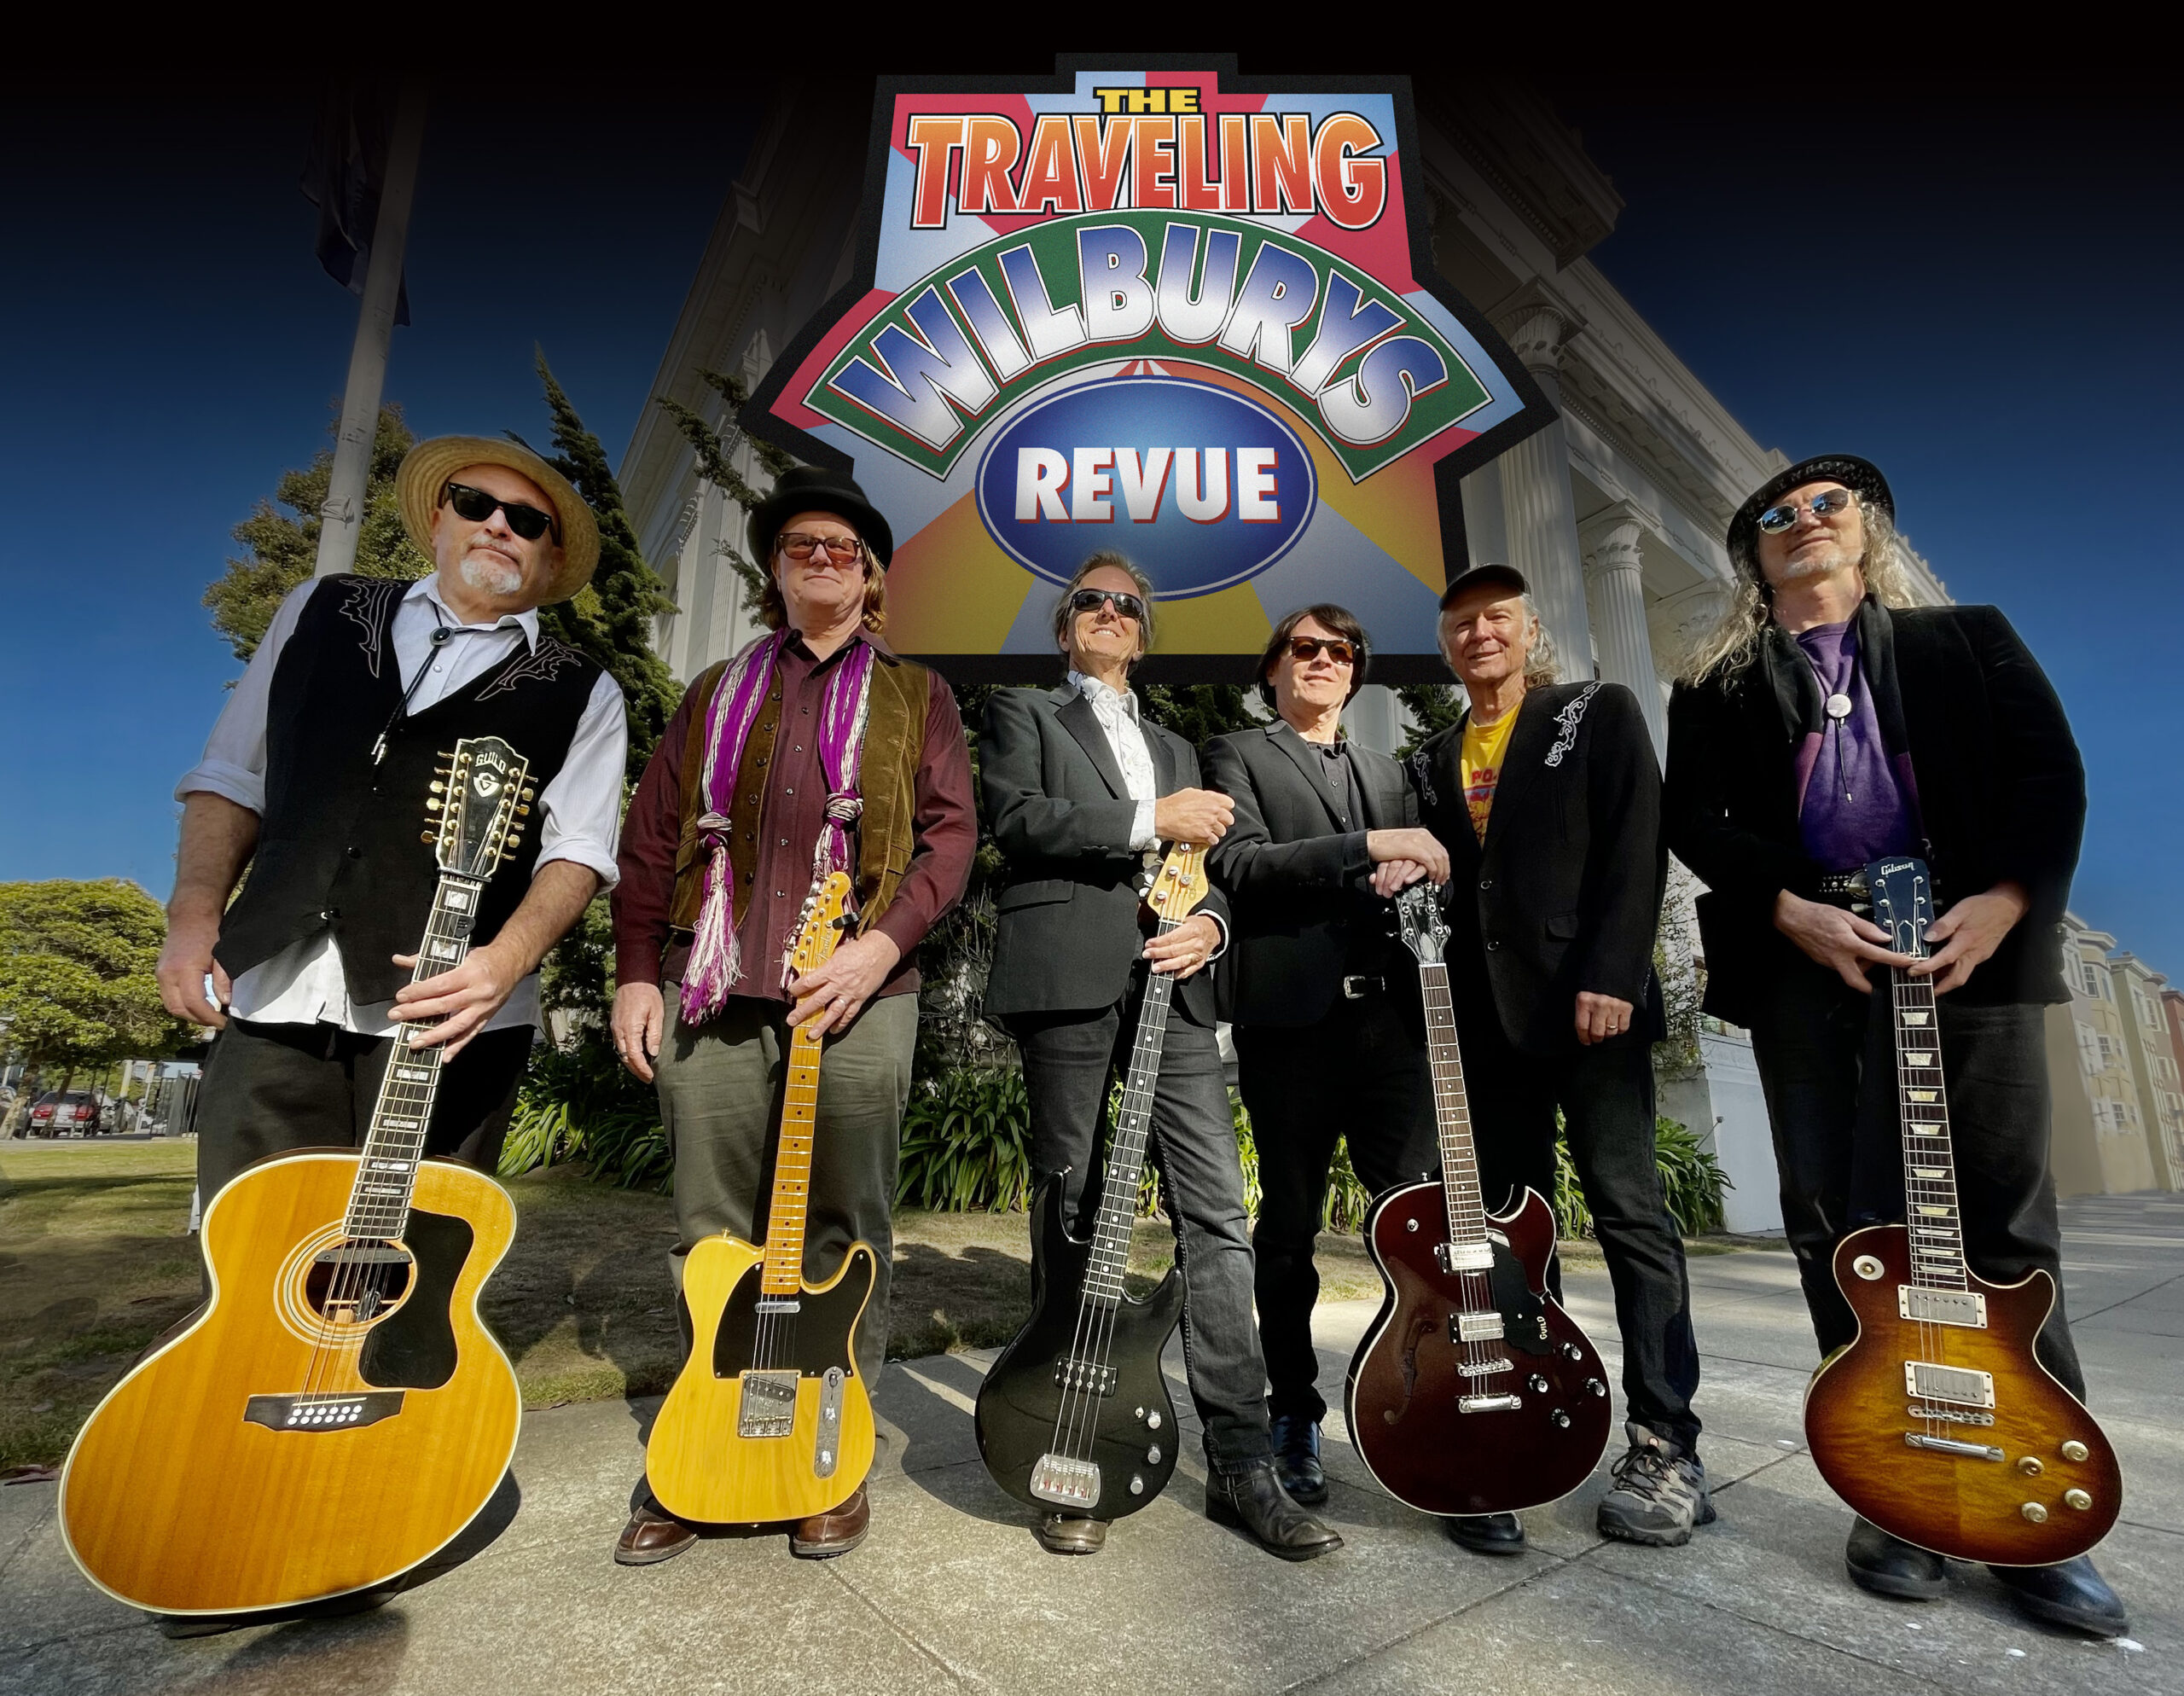 Concerts in the Park The Traveling Wilburys Belvedere, CA